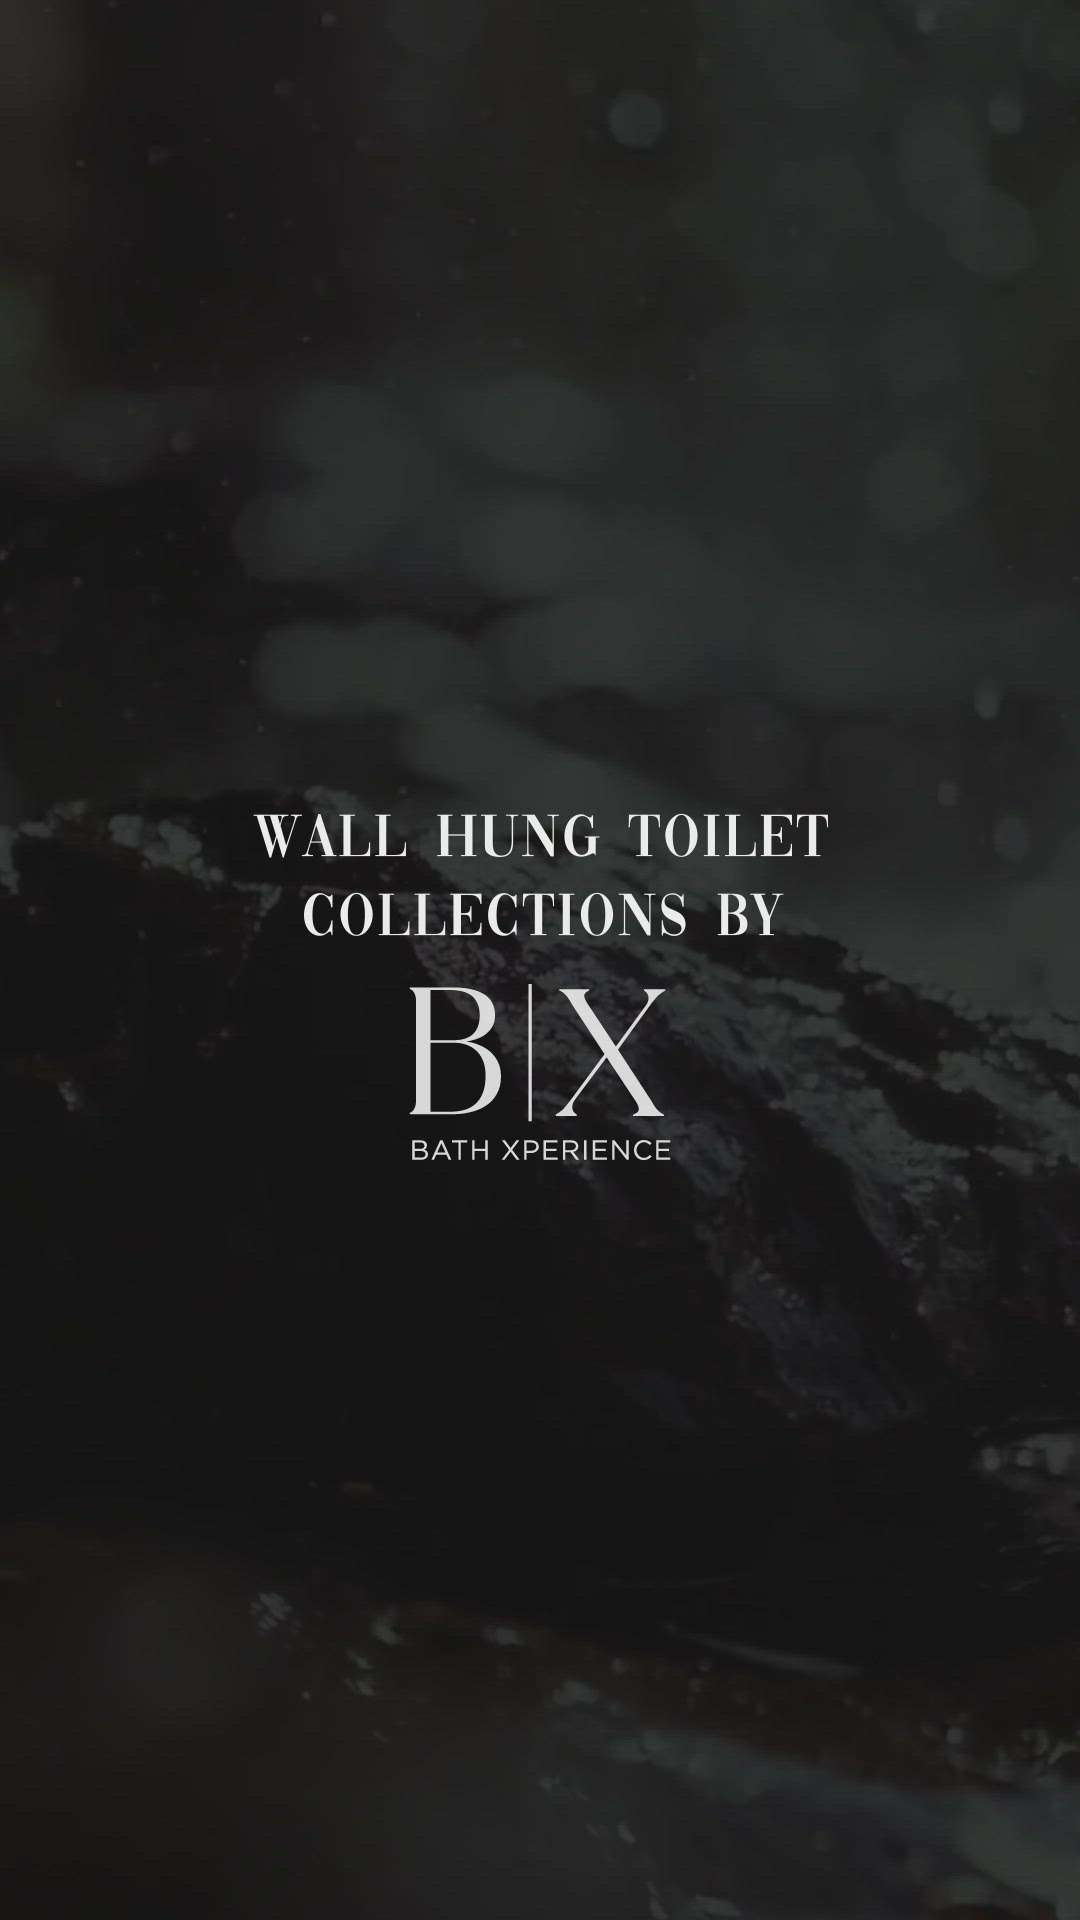 wall-hung toilet collections exude a timeless, sophisticated elegance that seamlessly integrates into modern and contemporary bathroom designs.

For more details, feel free to call us on +91 89431 97575

#abcmyhomekochi #designinspiration #homedecor #toilet #tileshop #onepiecetoilet #bathroomdecor #bathroominteriors #instadaily #bathroomrenovation #instagood #reels #kochi #alappuzha #kerala #bathroomluxury #efficiencyredefined